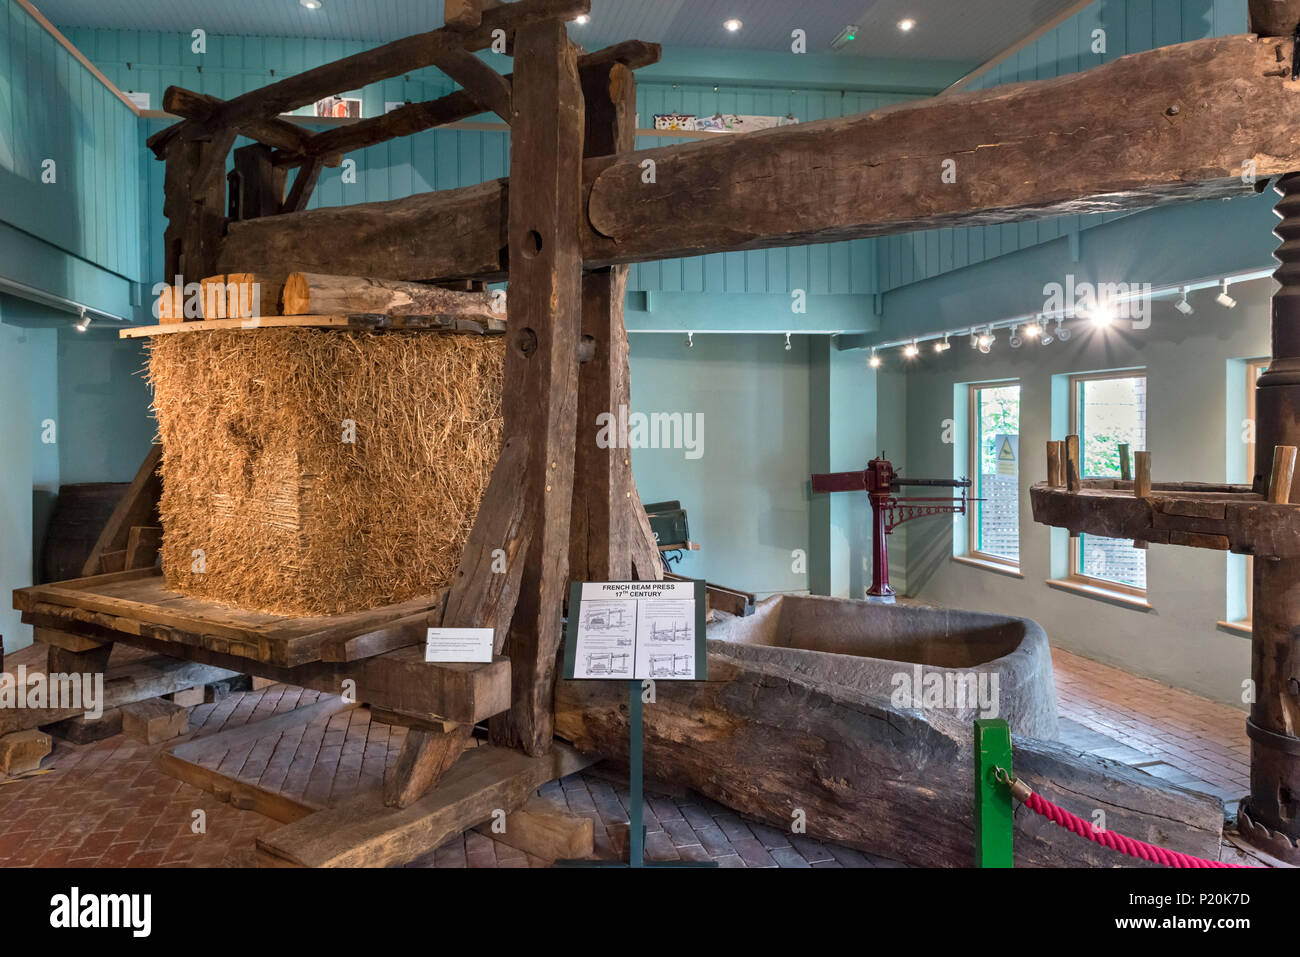 cider-making-a-17th-century-french-beam-press-in-the-hereford-cider-museum-hereford-herefordshire-england-uk-P20K7D.jpg